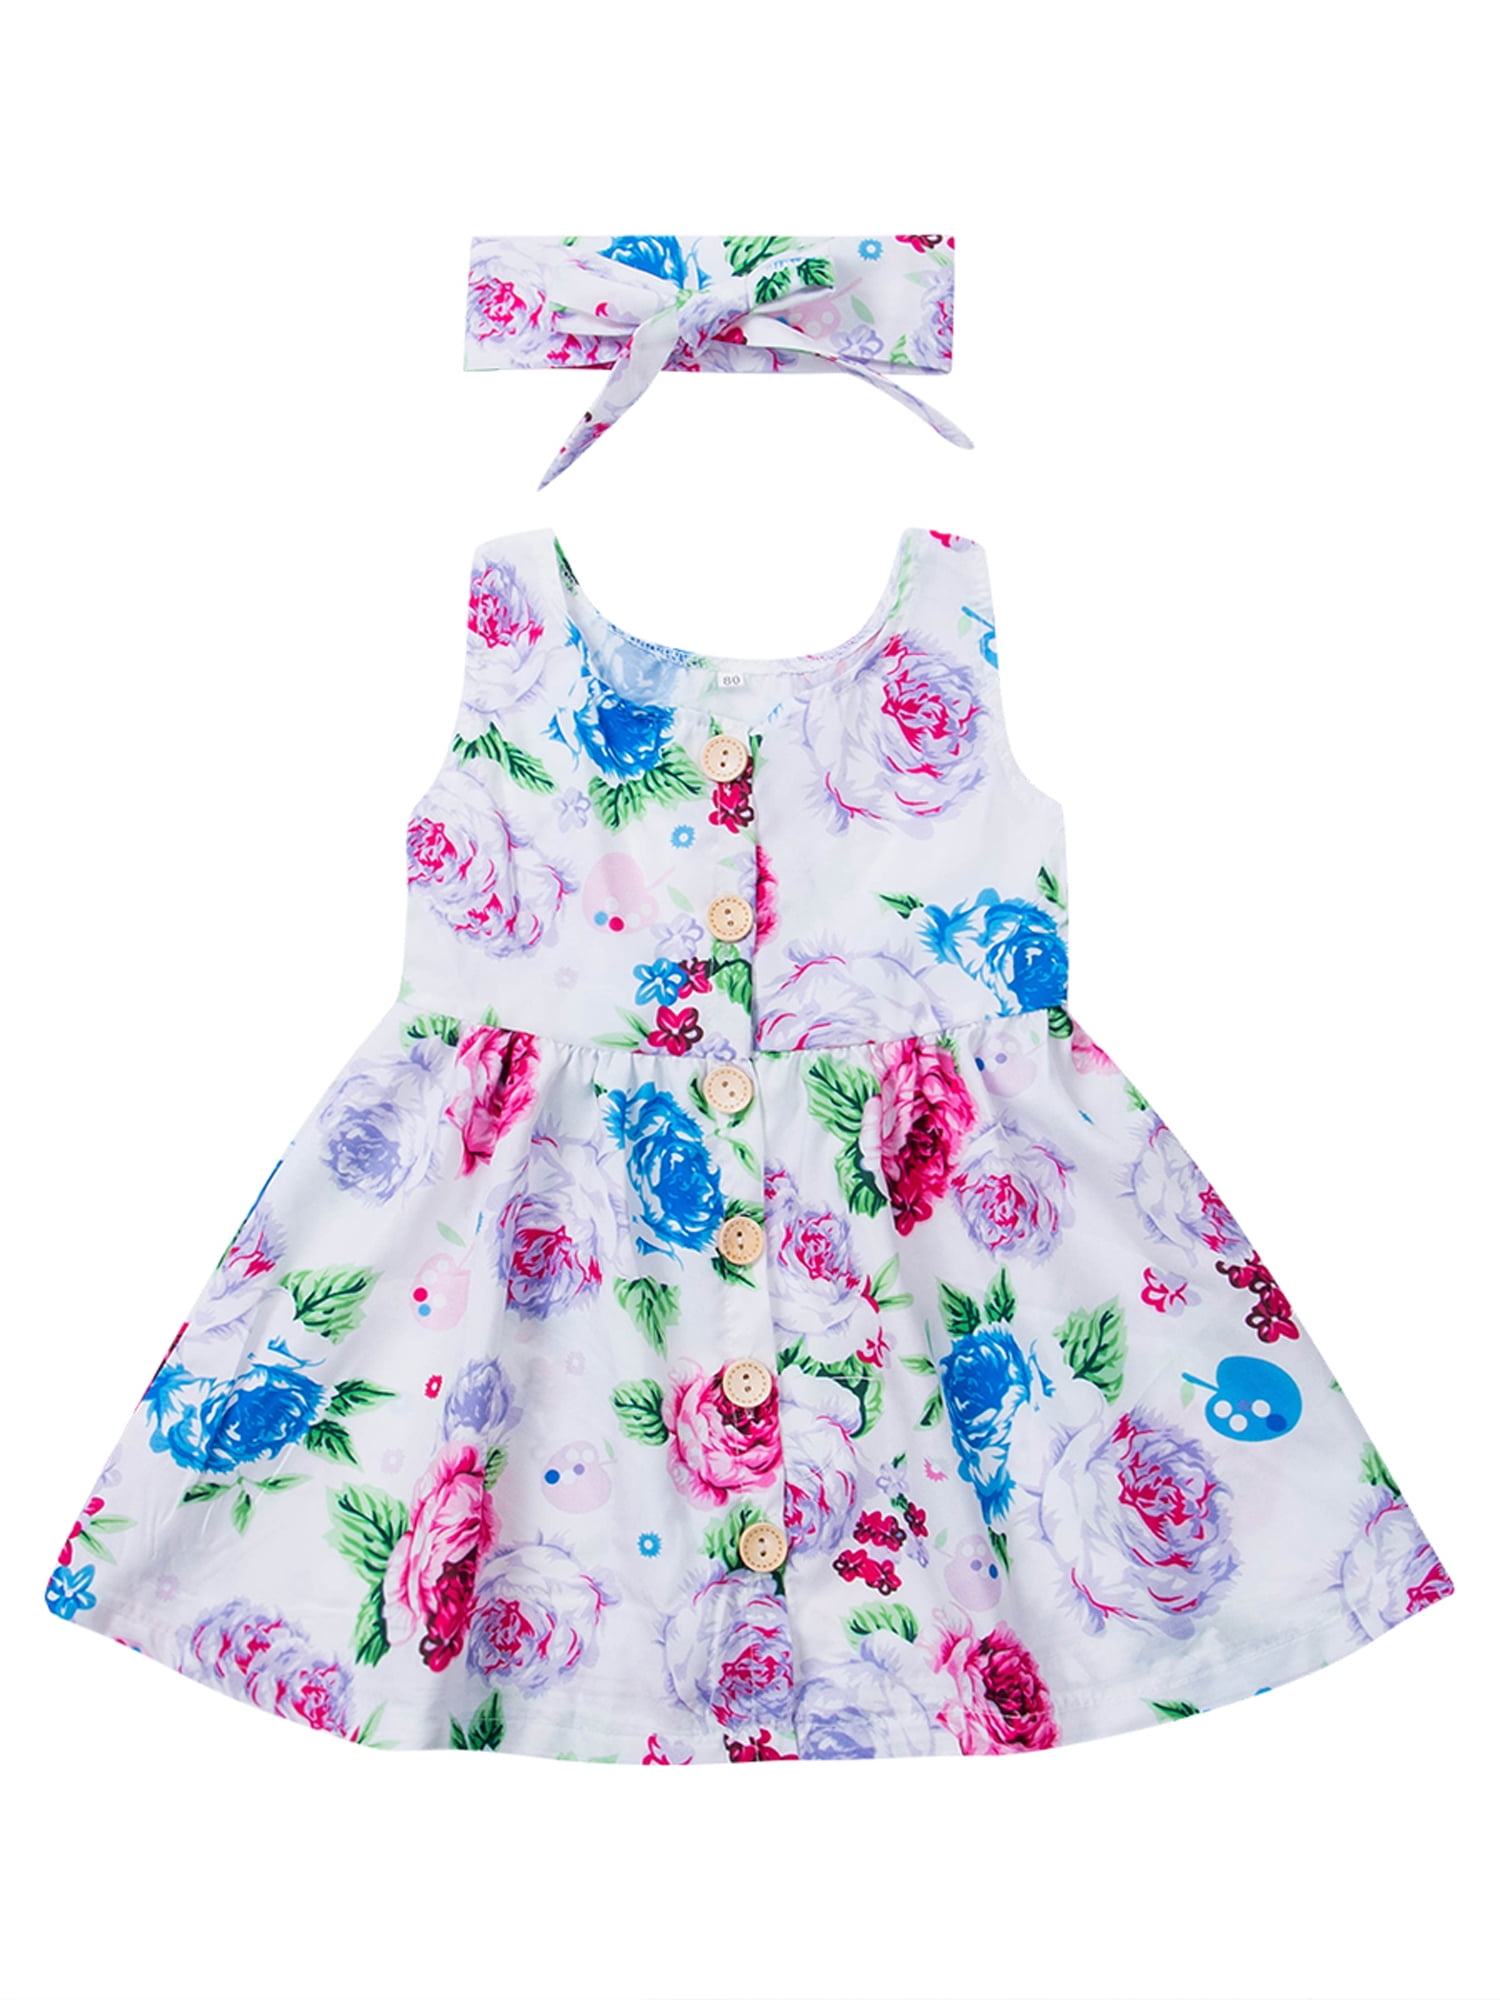 Toddler Kids Baby Girls Summer Beach Floral Dress Princess Party Pageant Dresses